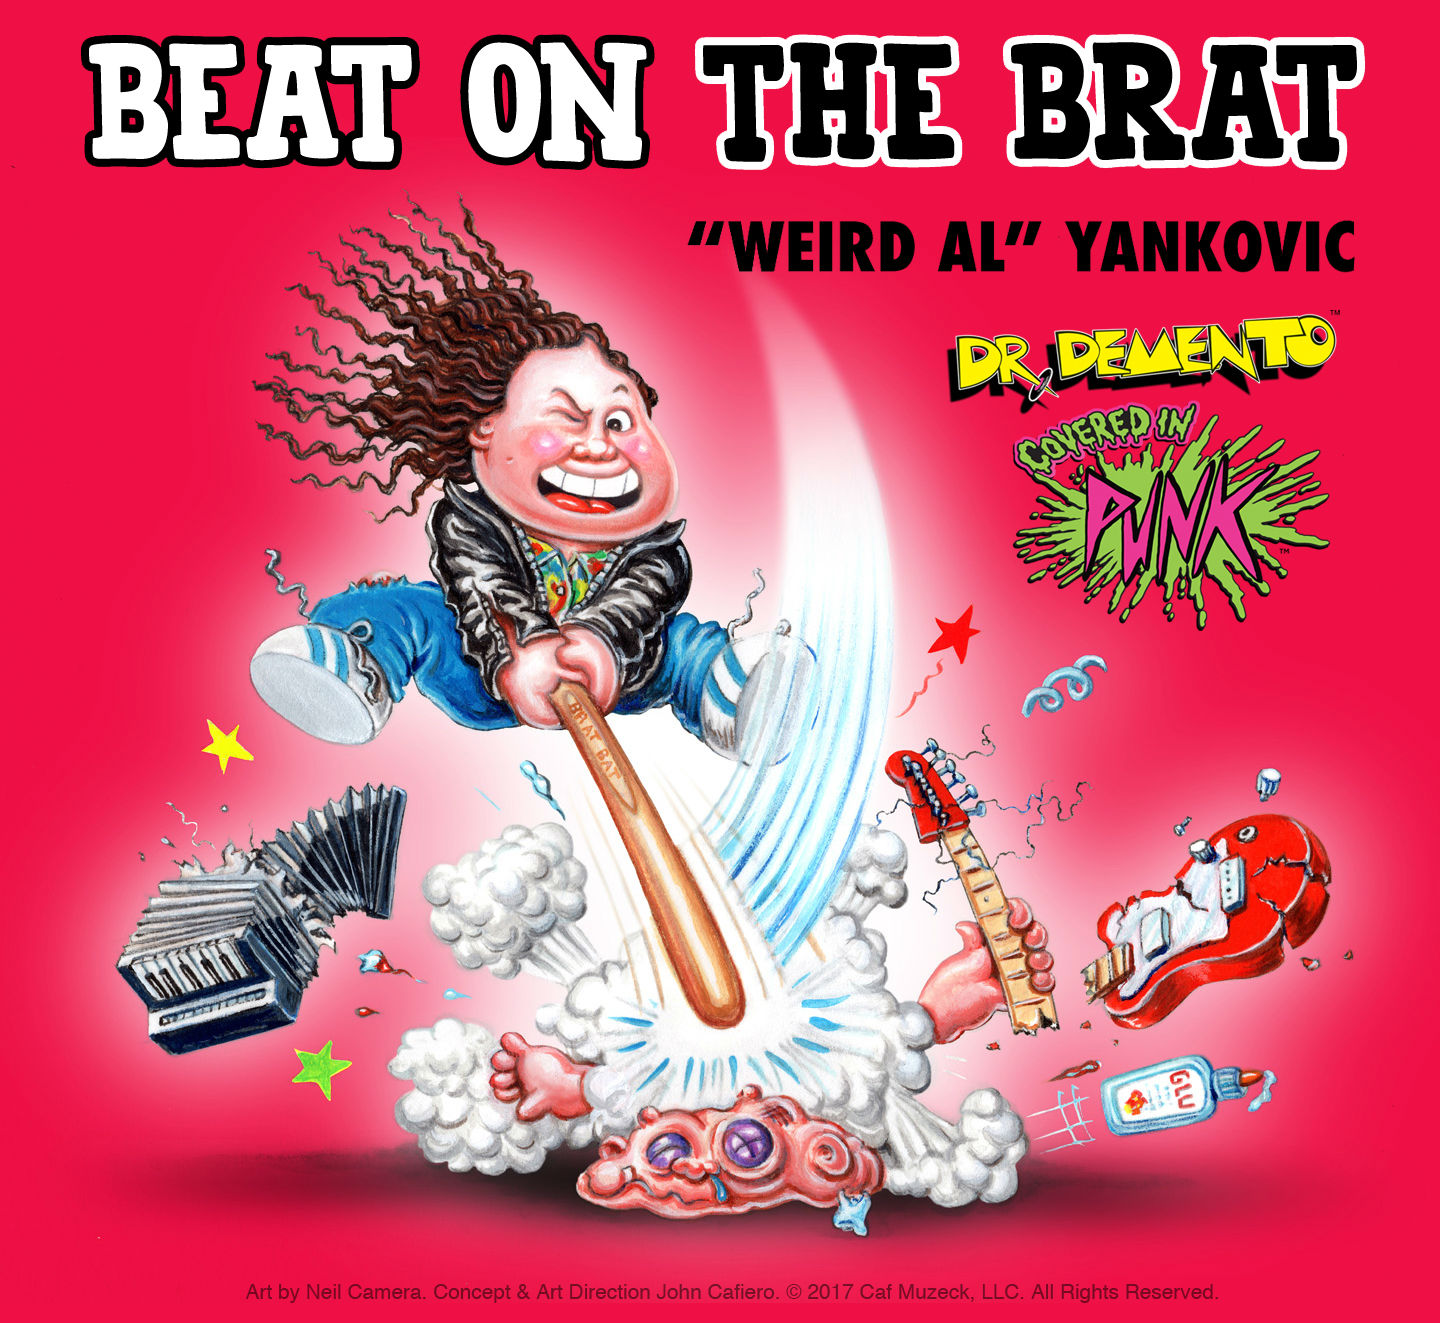 Beat on the Brat “Weird Al” Artwork by Neil Camera. © 2018 Caf Muzeck, LLC. All Rights Reserved